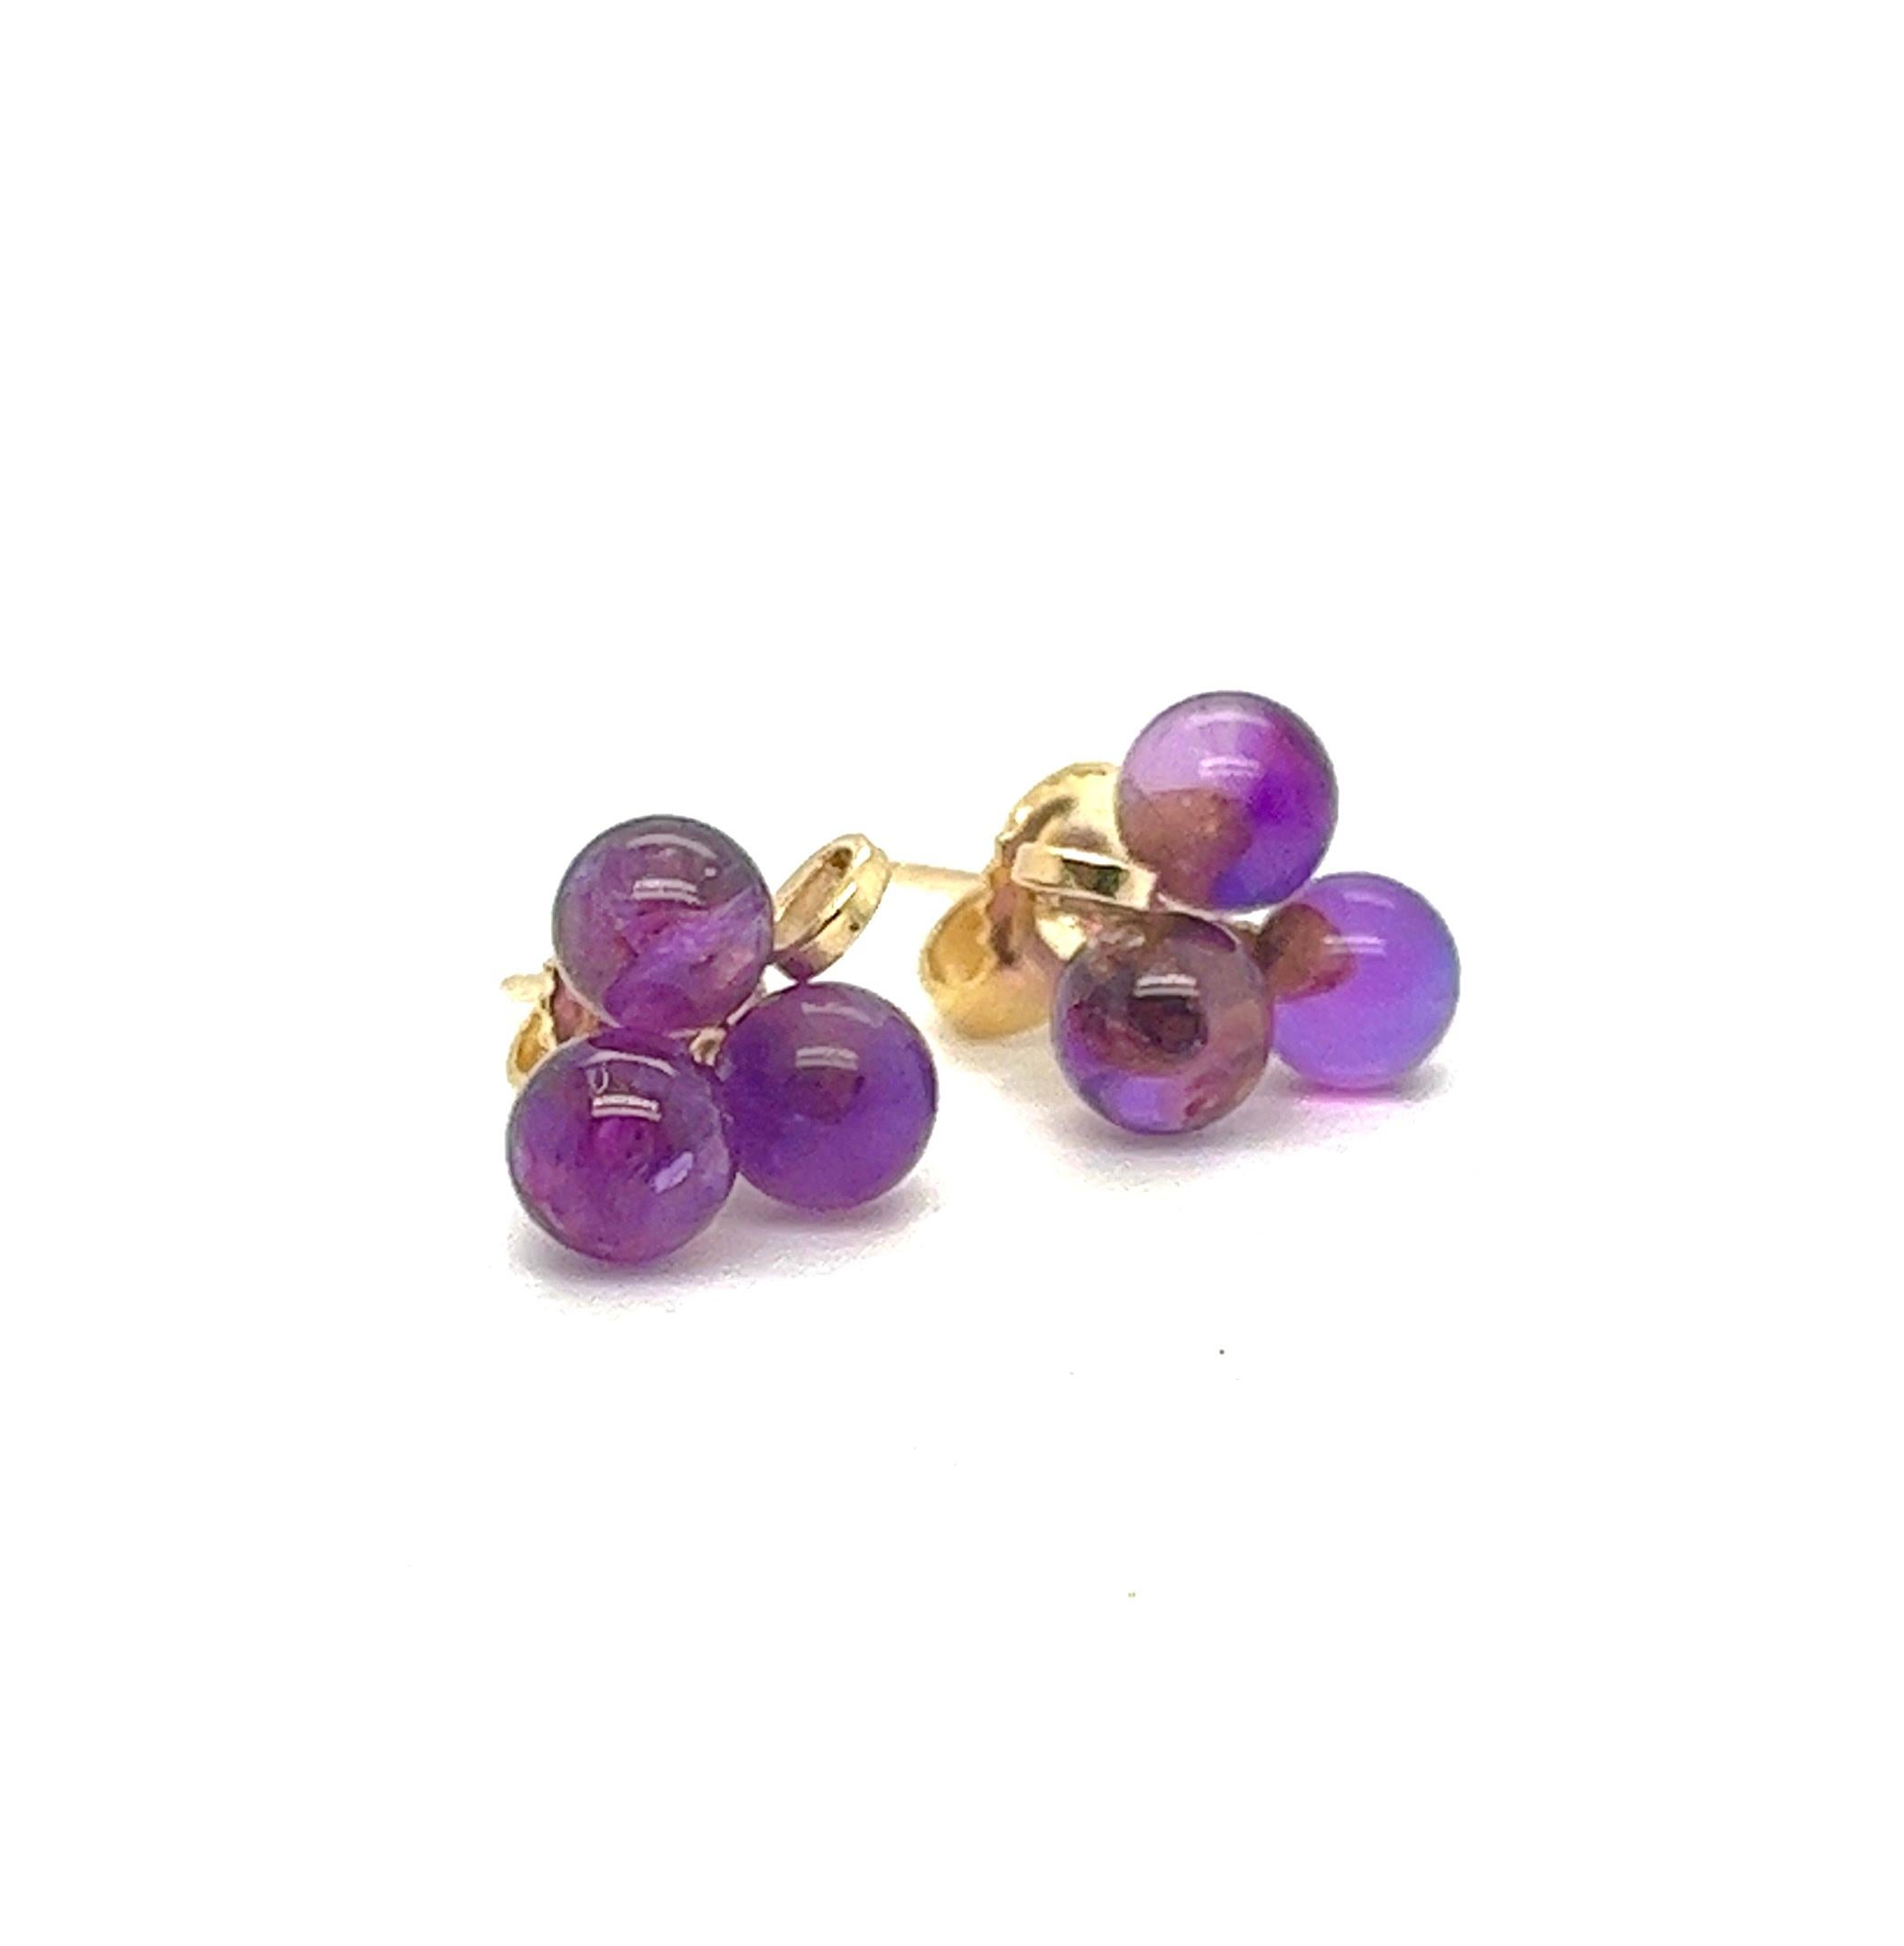 Offered here is a lovely pair of stud earring, 
Handmade in solid 14kt yellow gold, 
featuring 5 mm round natural Amethyst gemstones in vivid purple color.
offered here in a no reserve auction, winner will take and enjoy this wonderful pair,